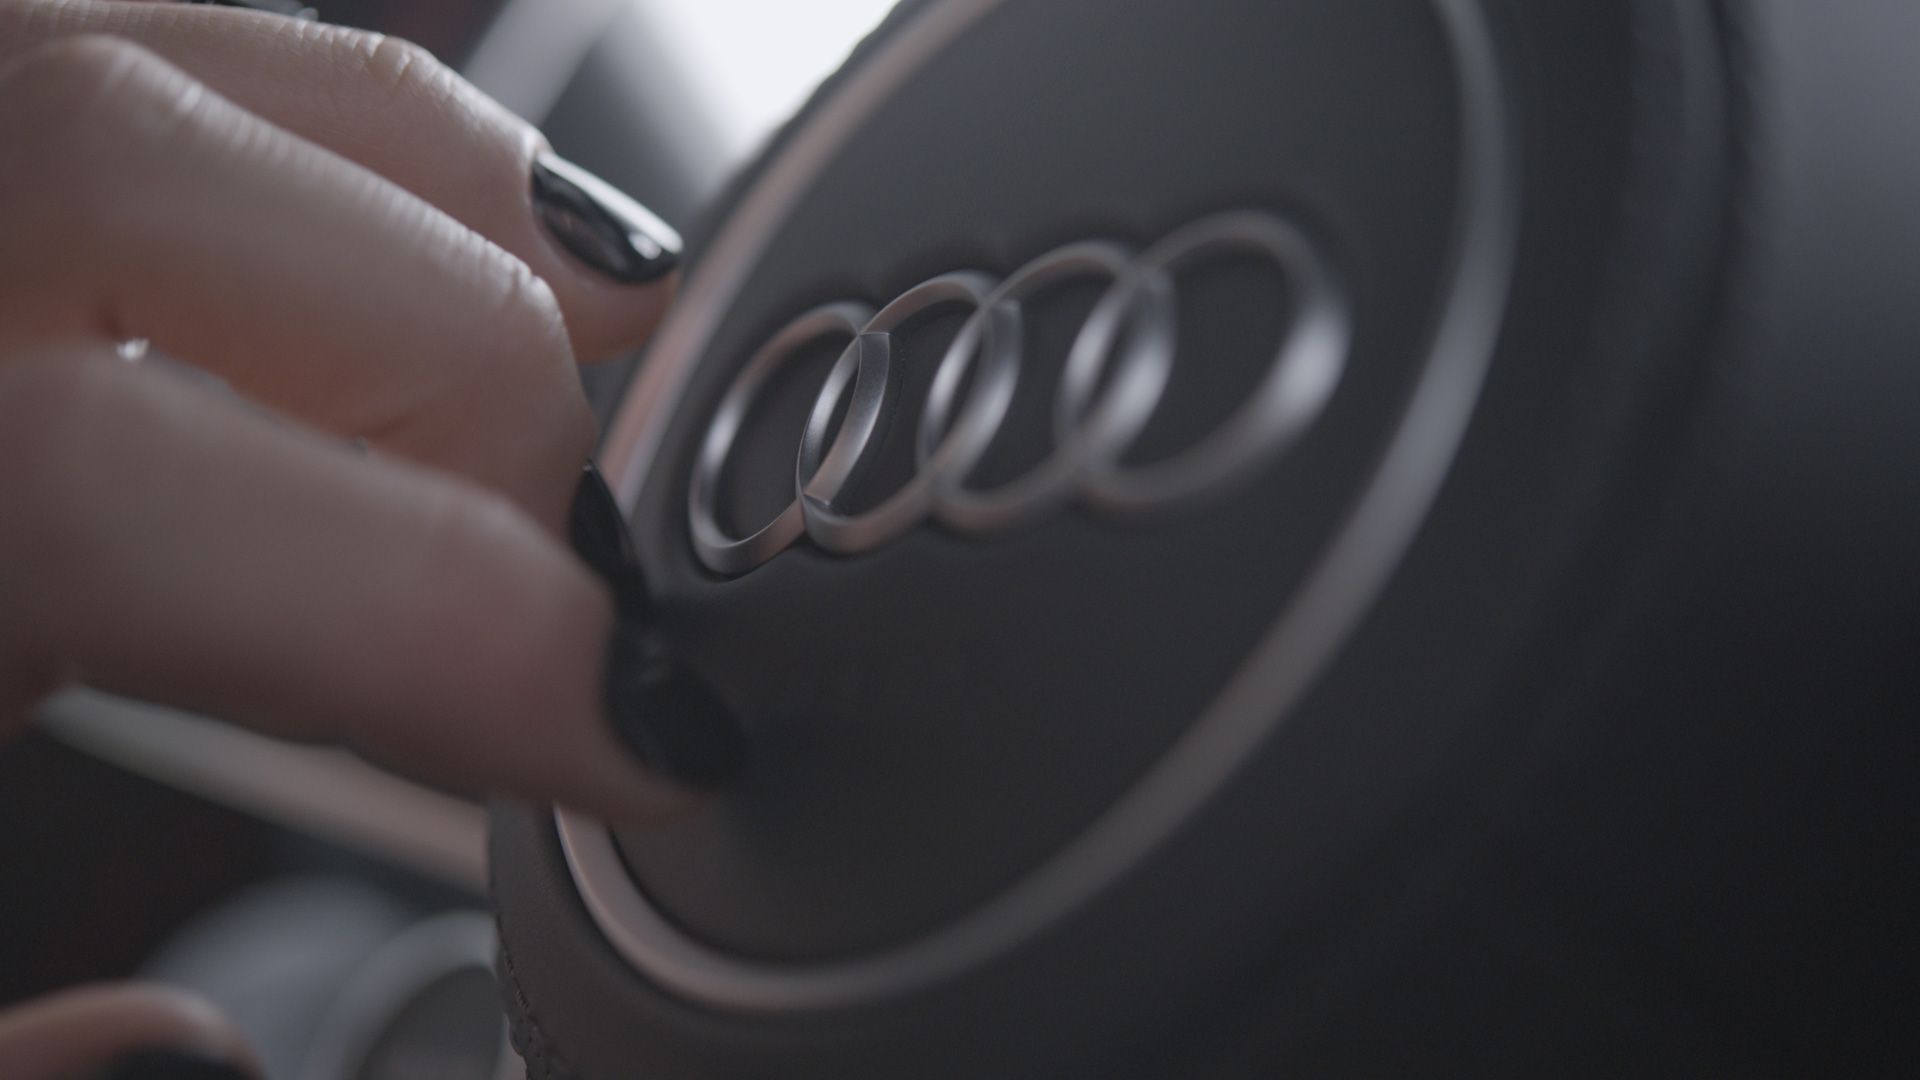 A female hand touching the Audi logo on the steering wheel of an Audi R8 GT